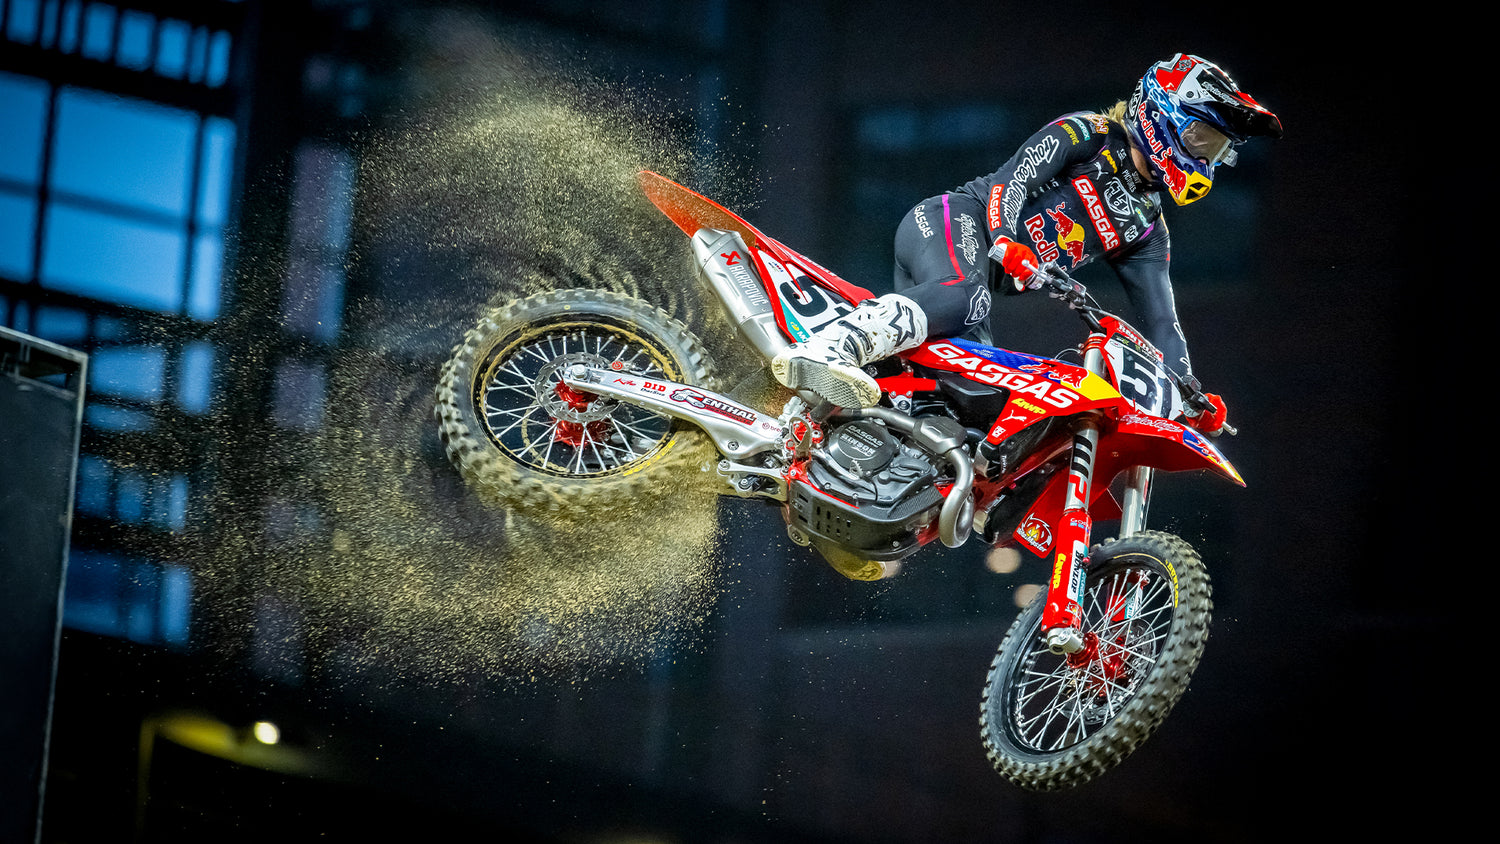 Justin Barcia going over a jump, wearing an SE5 Helmet